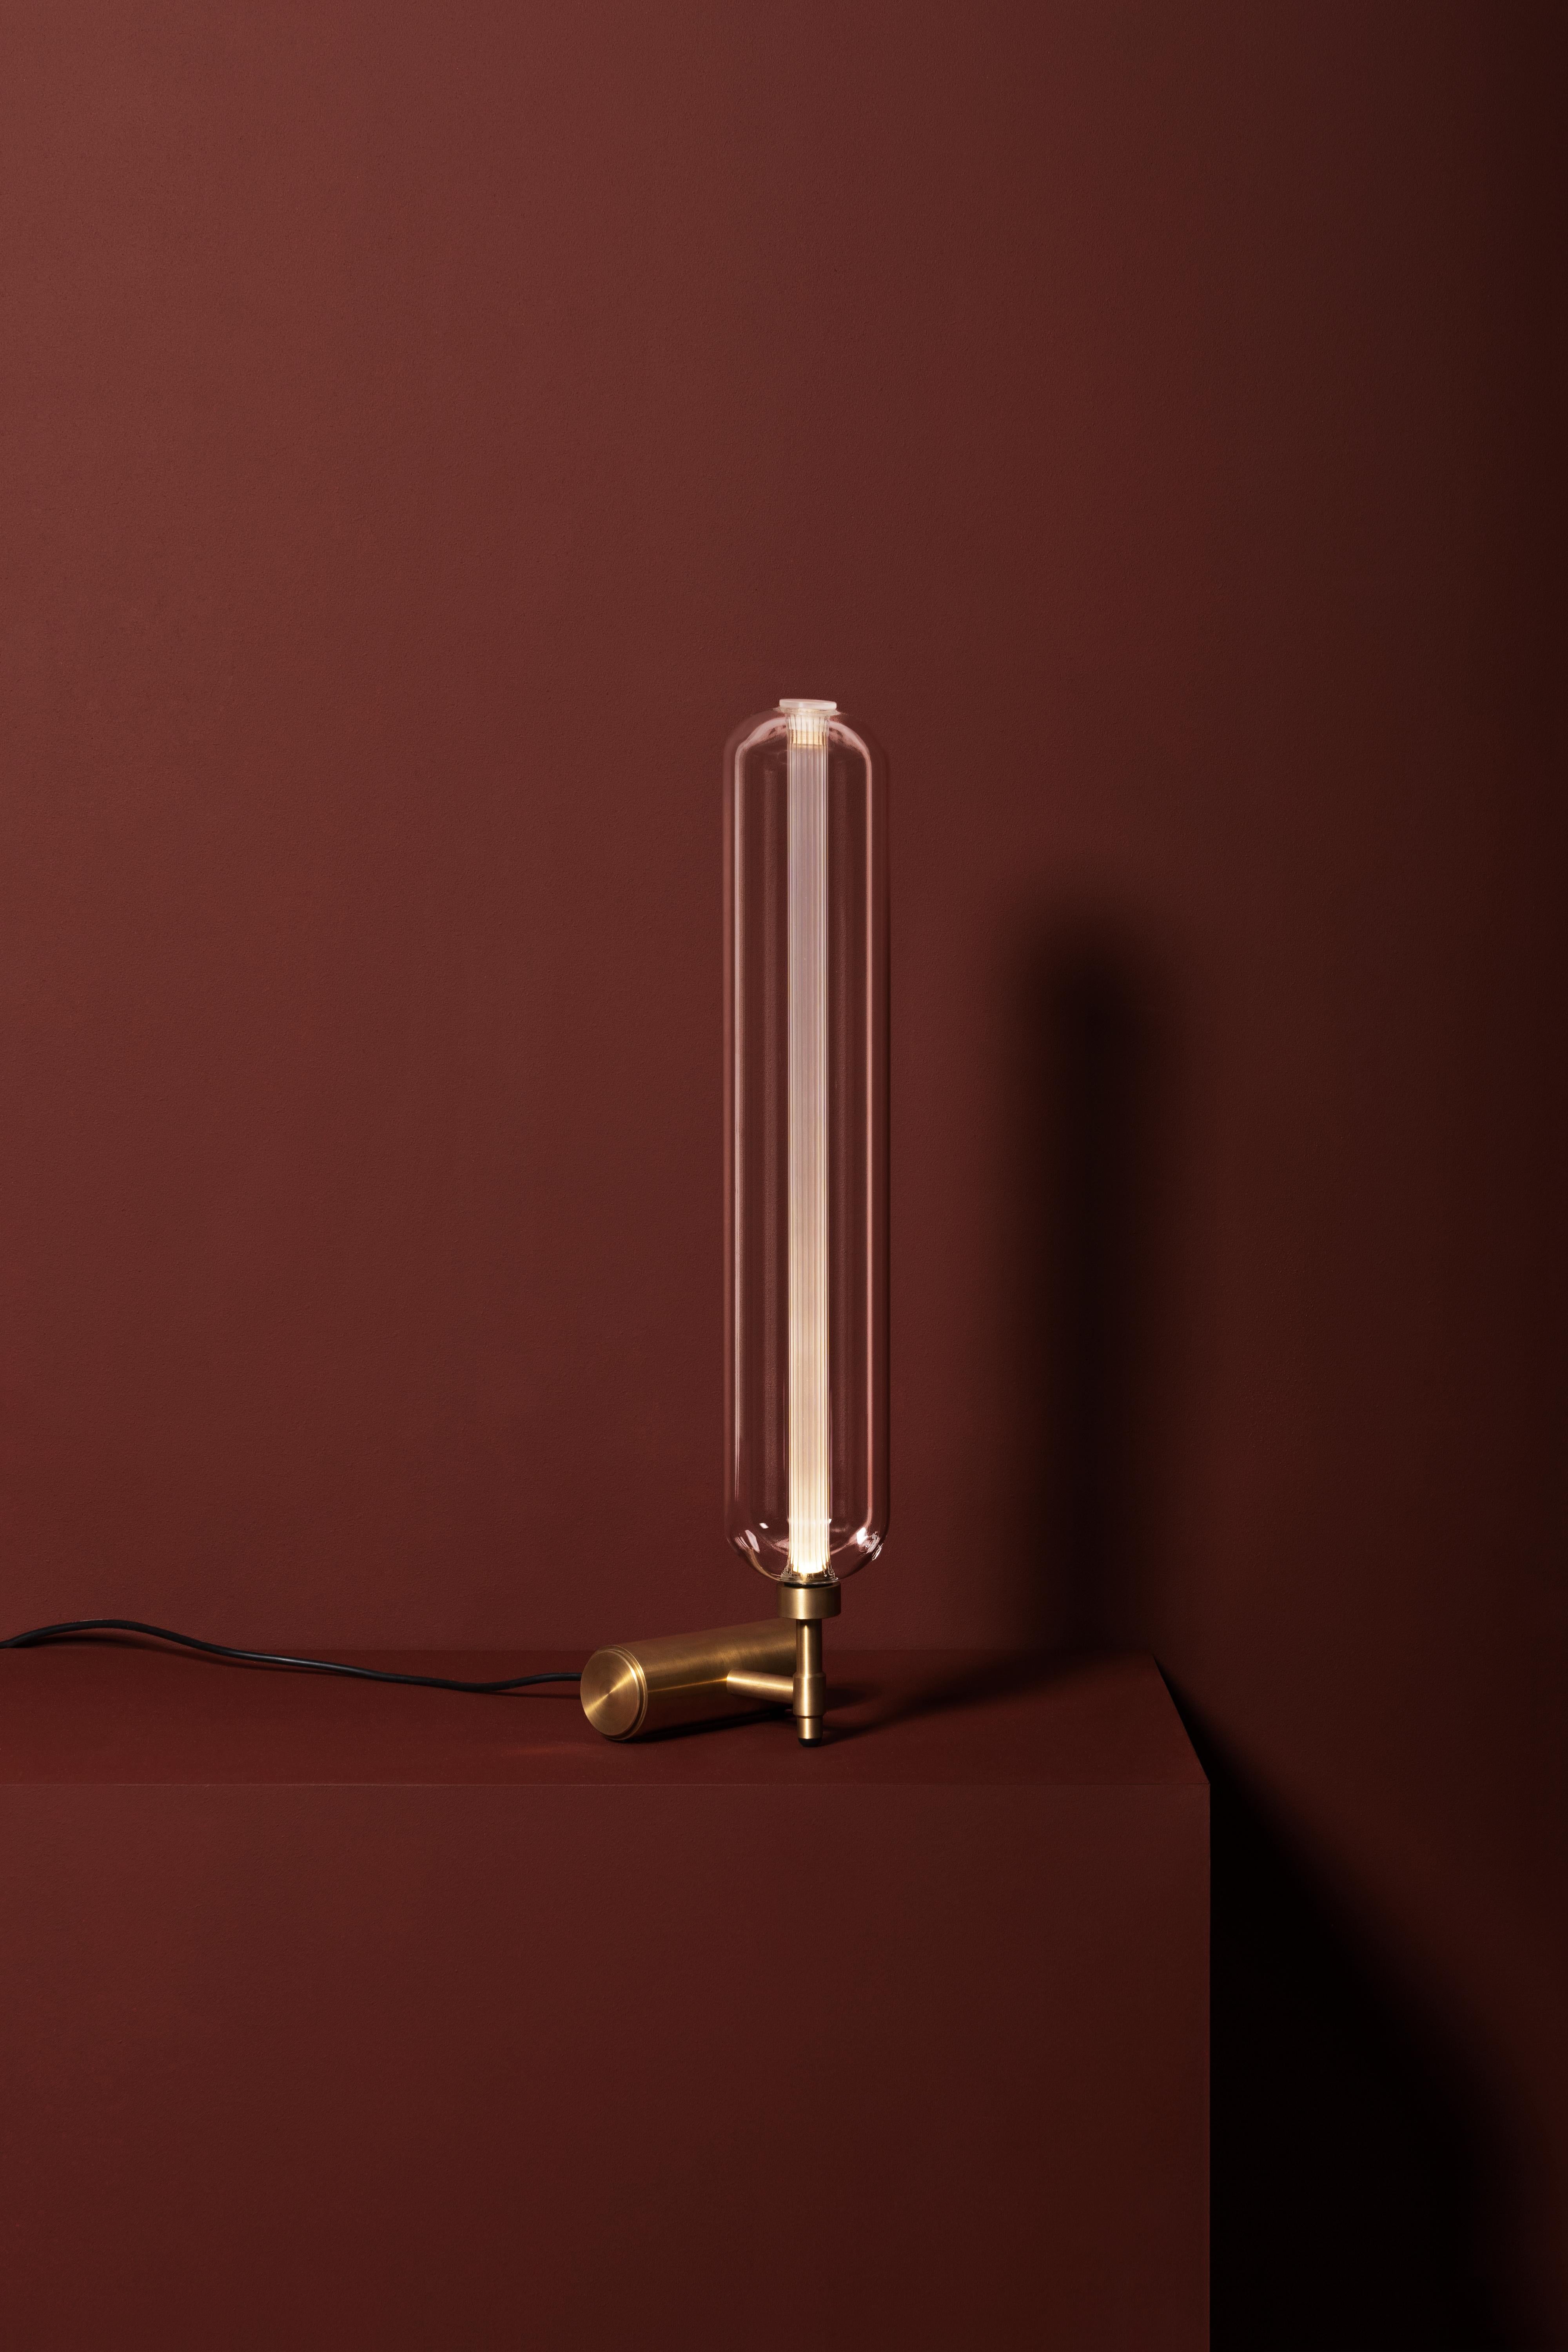 Designed by Milanese architect Pietro Russo for Dante, the Scintilla table lamp is nothing short of a solid, modern, pure and versatile lighting sculpture. The lamp is named for its sparkle effect when lit. Formed from two mouth-blown glass